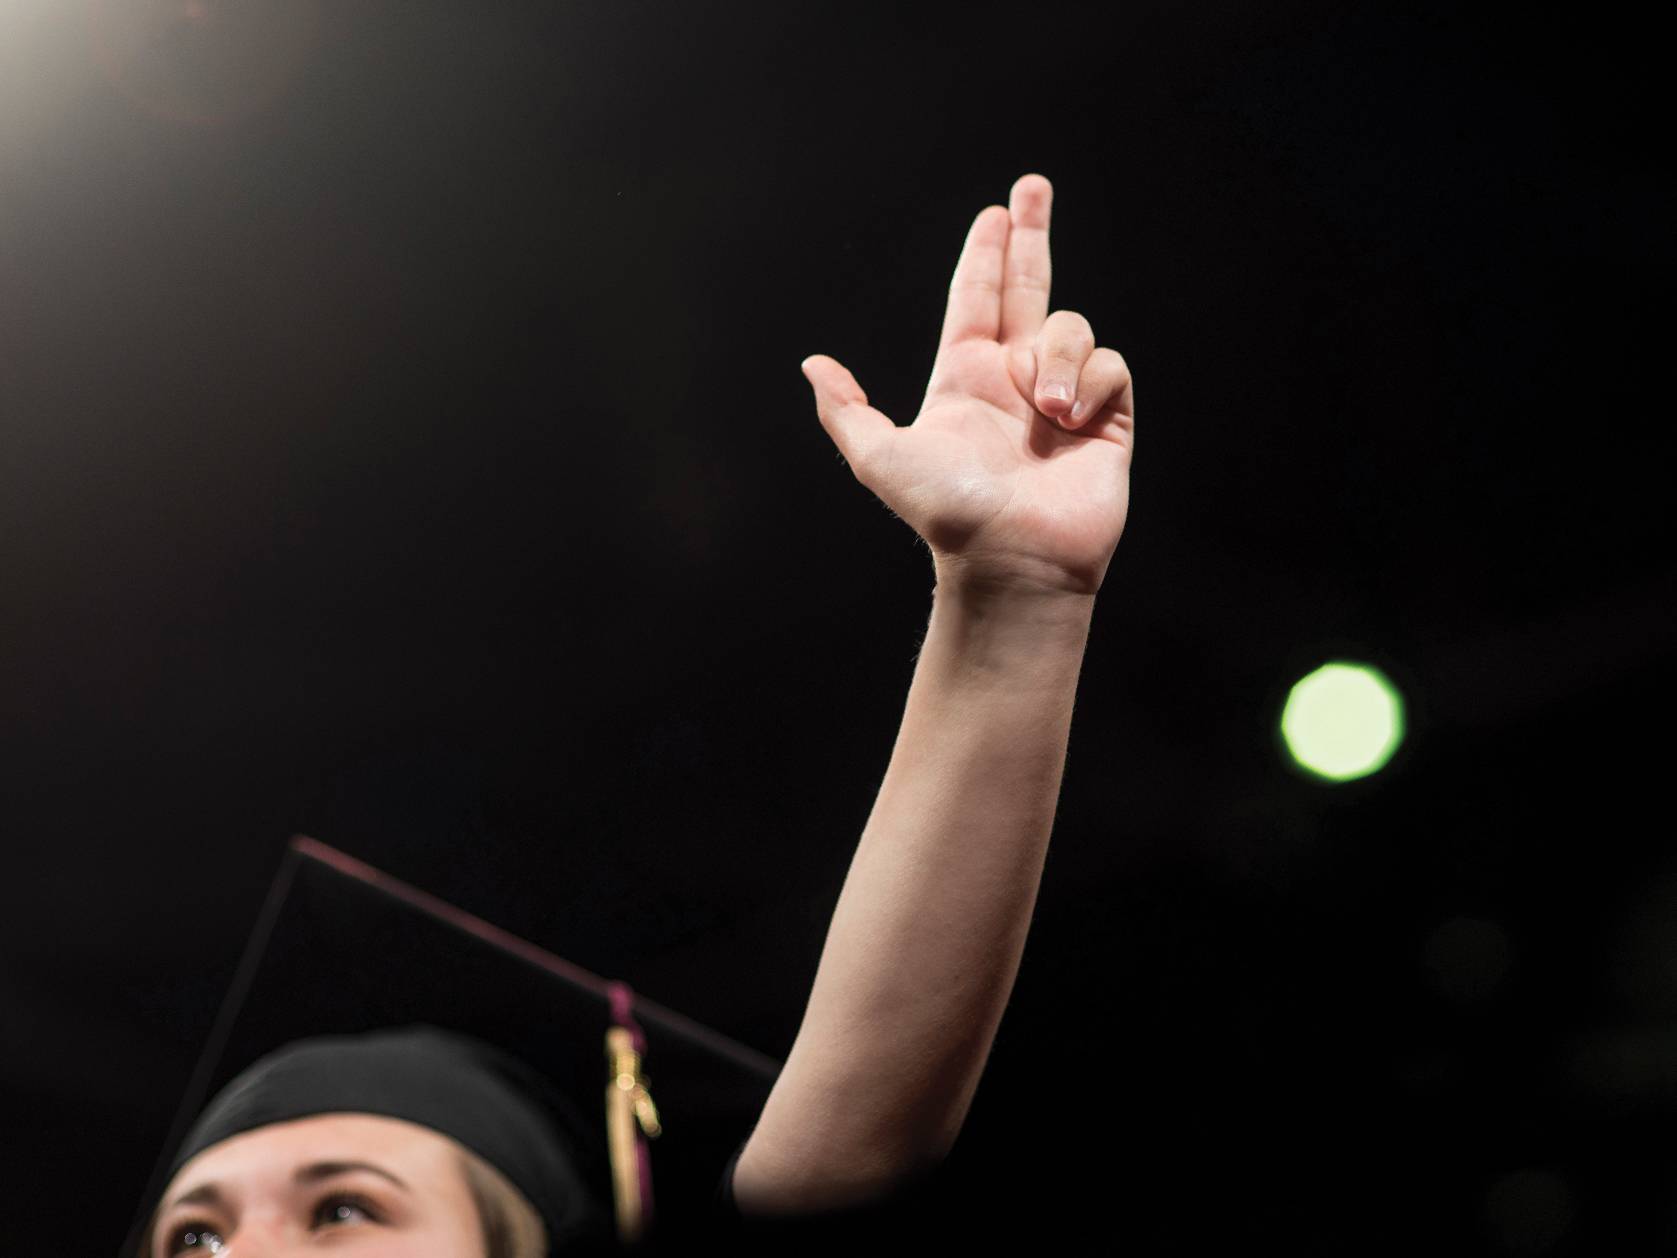 graduate holding up texas state hand sign